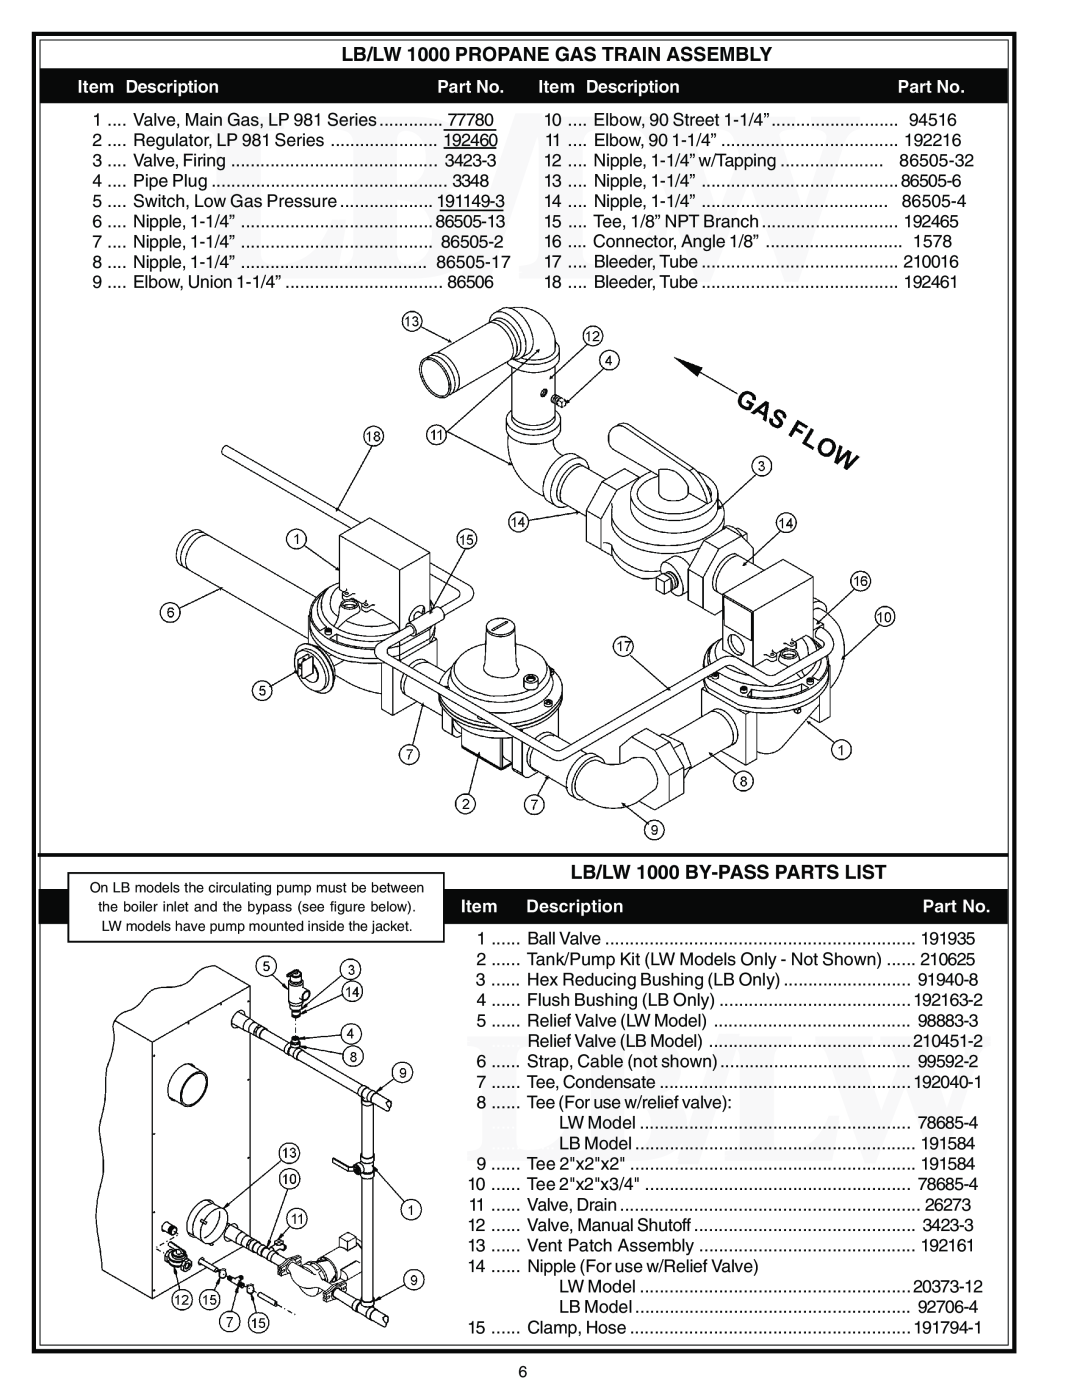 A.O. Smith 981 Series, 980 Series manual LB/LW 1000 PROPANE GAS TRAIN ASSEMBLY, LB/LW 1000 BY-PASS PARTS LIST, Description 